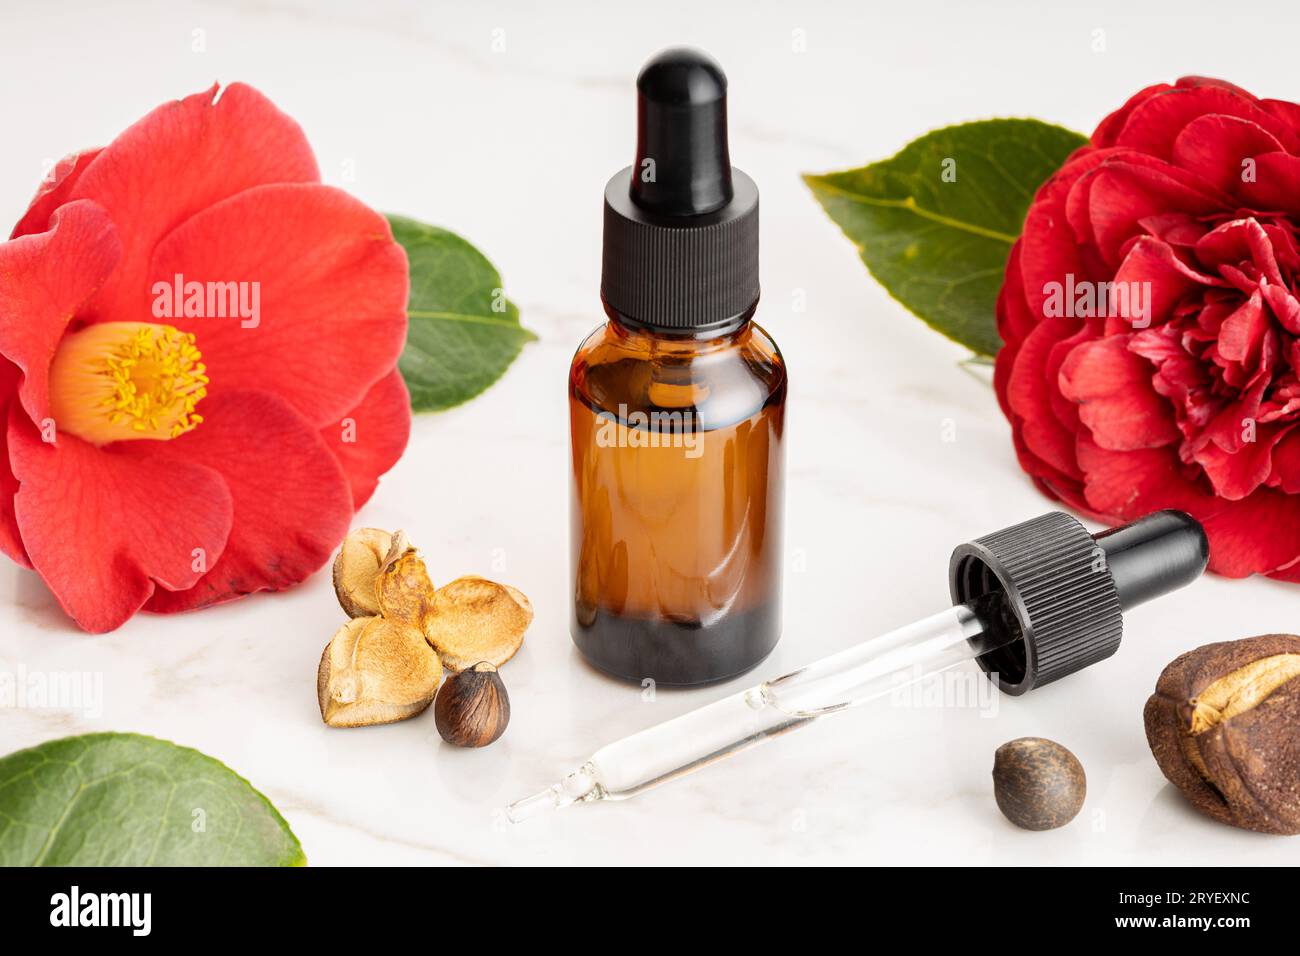 Camellia essential oil. Camellia flower, seeds and oil glass bottle for beauty, skin care, wellness Stock Photo